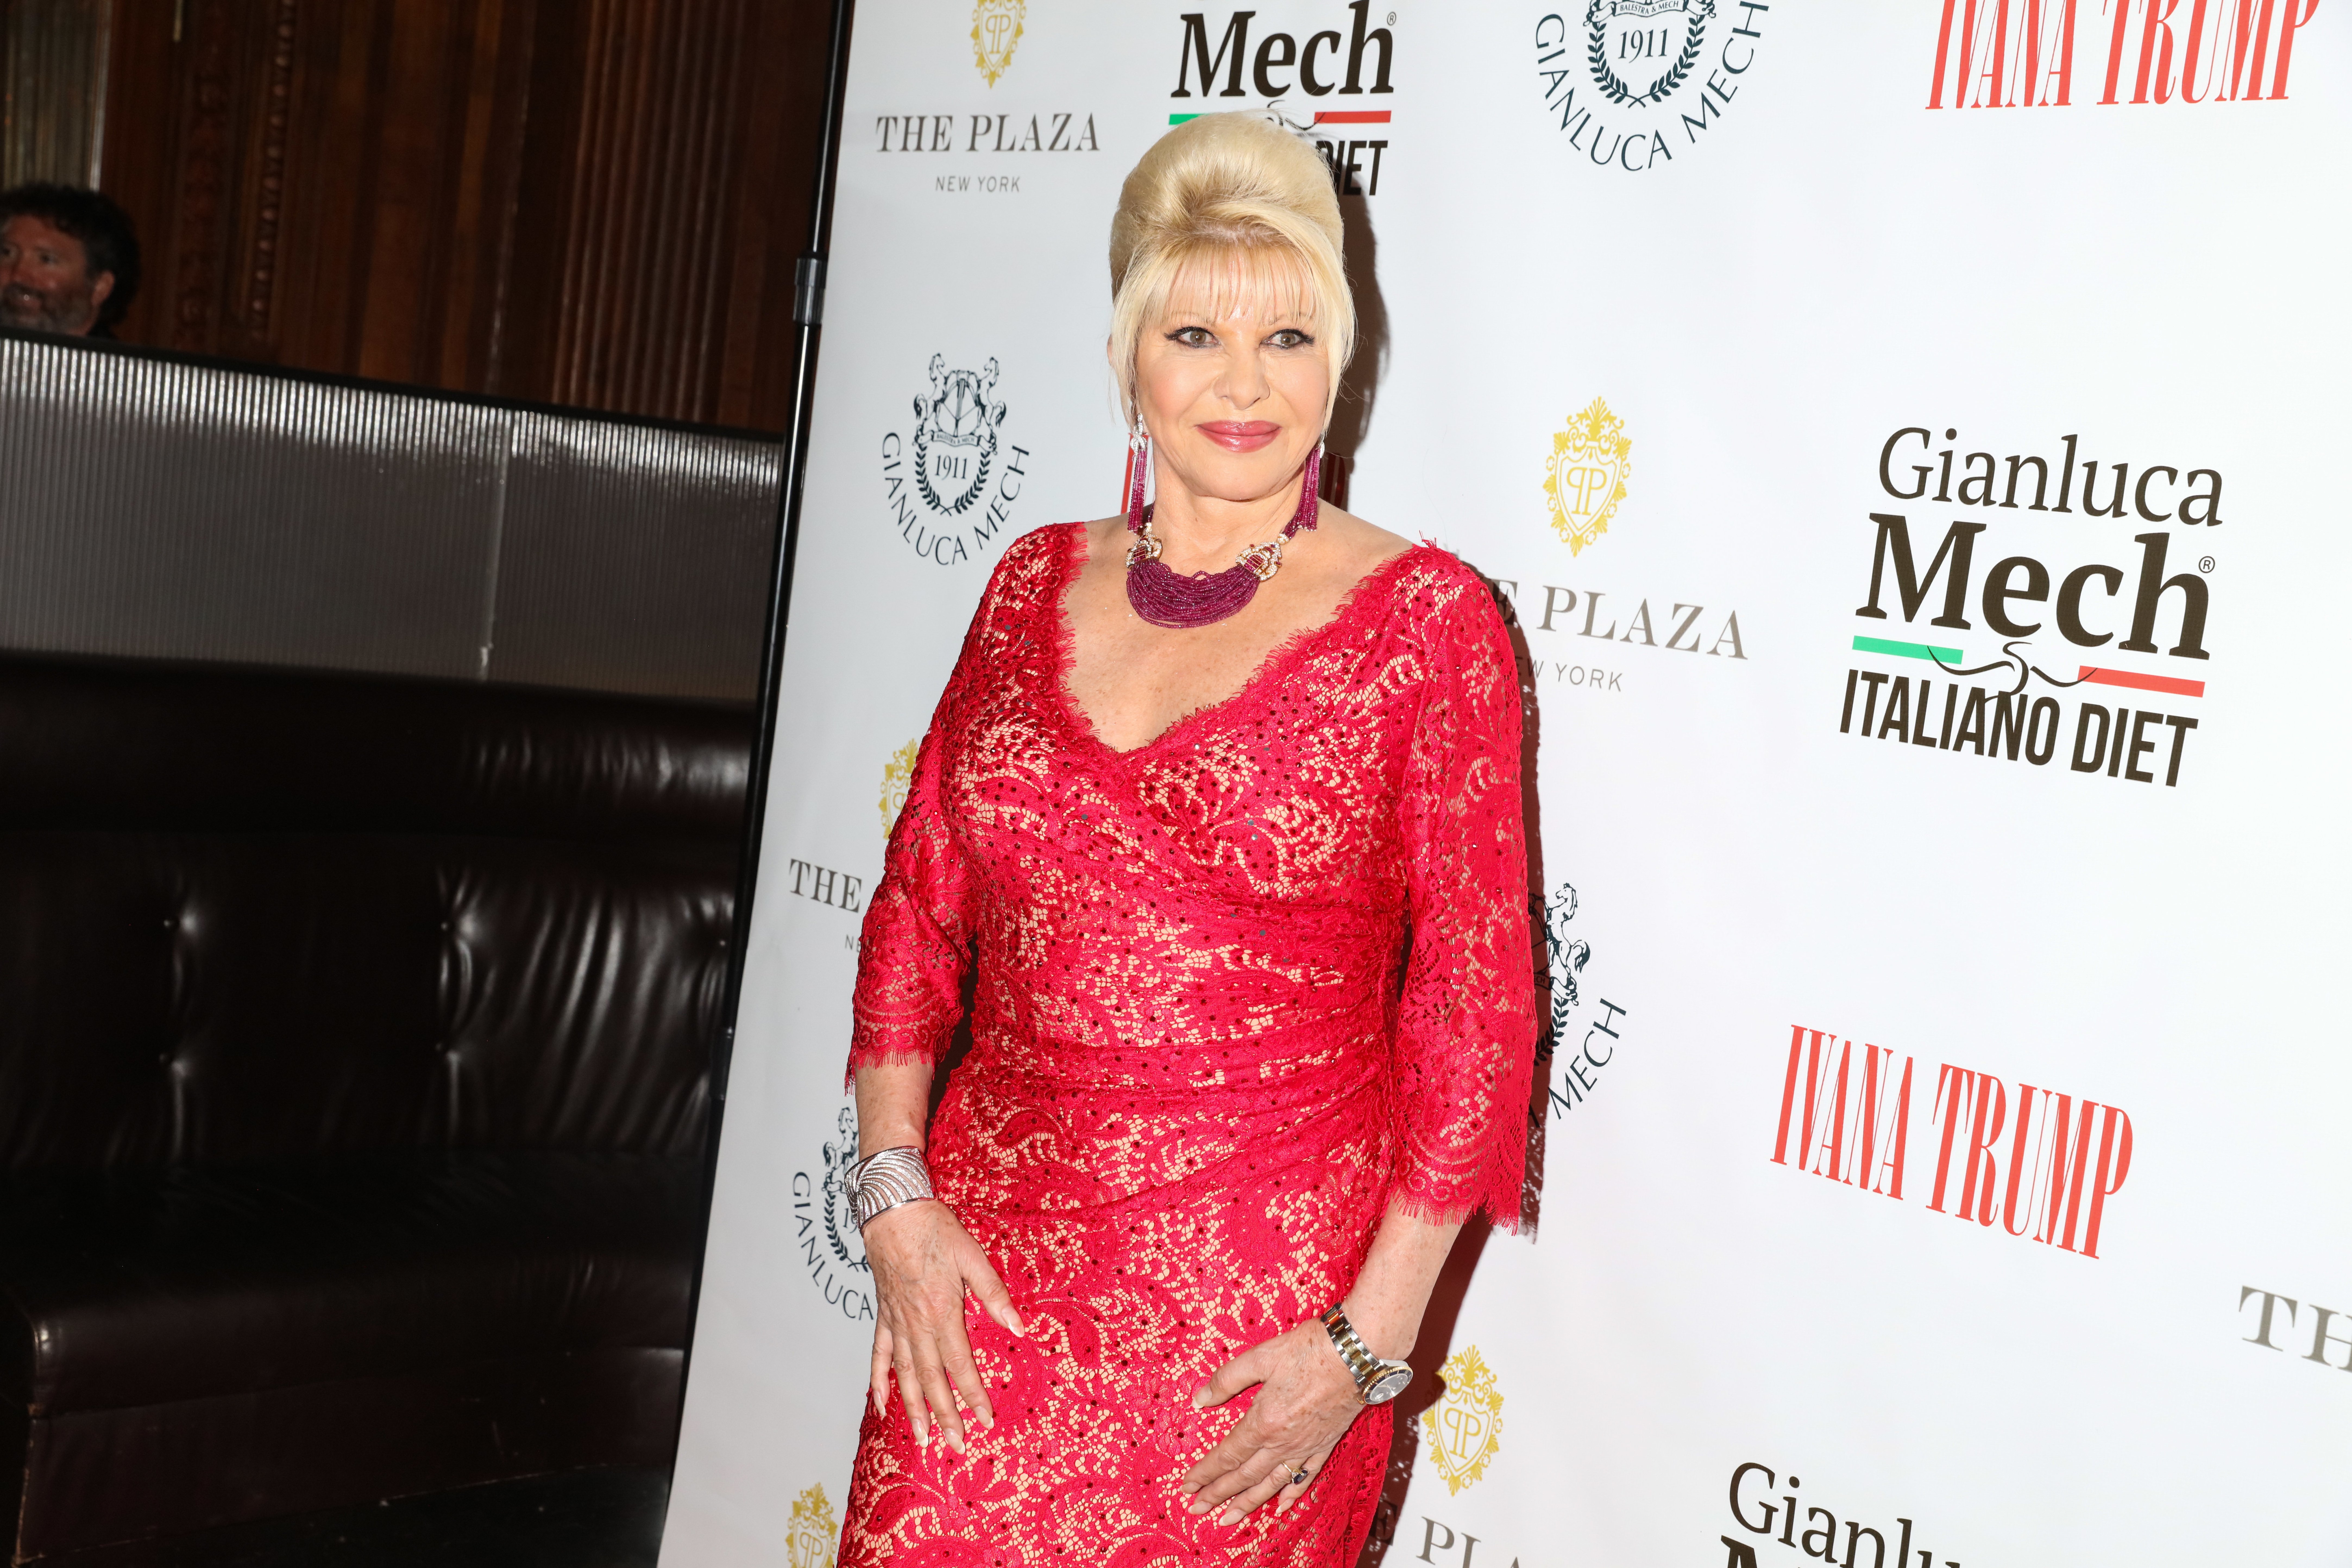 Ivana Trump poses for photos at the book launch and reception for Ivana Trump and Gianluca Mech's "The Italiano Diet",  June 13, 2018 in New York, New York. | Source: Getty Images